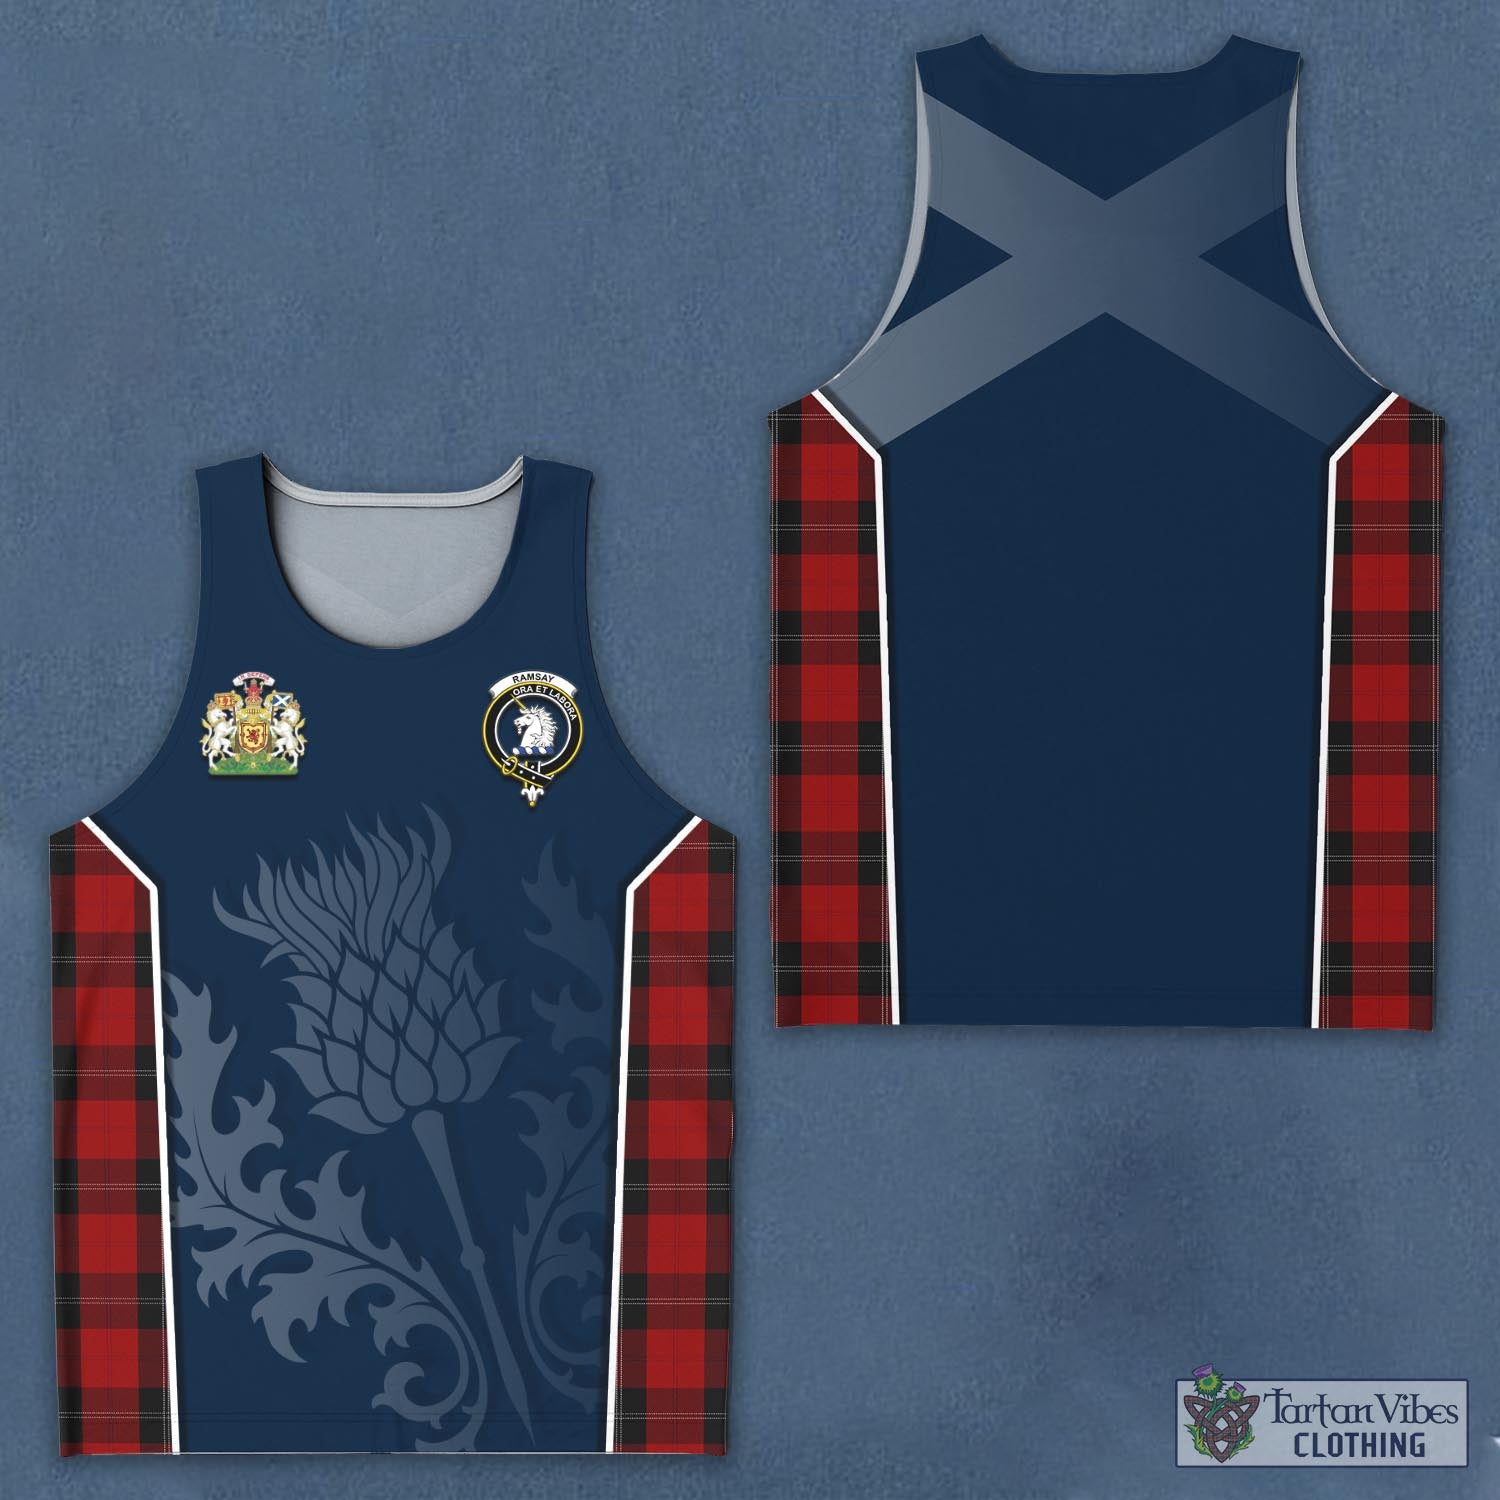 Tartan Vibes Clothing Ramsay Tartan Men's Tanks Top with Family Crest and Scottish Thistle Vibes Sport Style